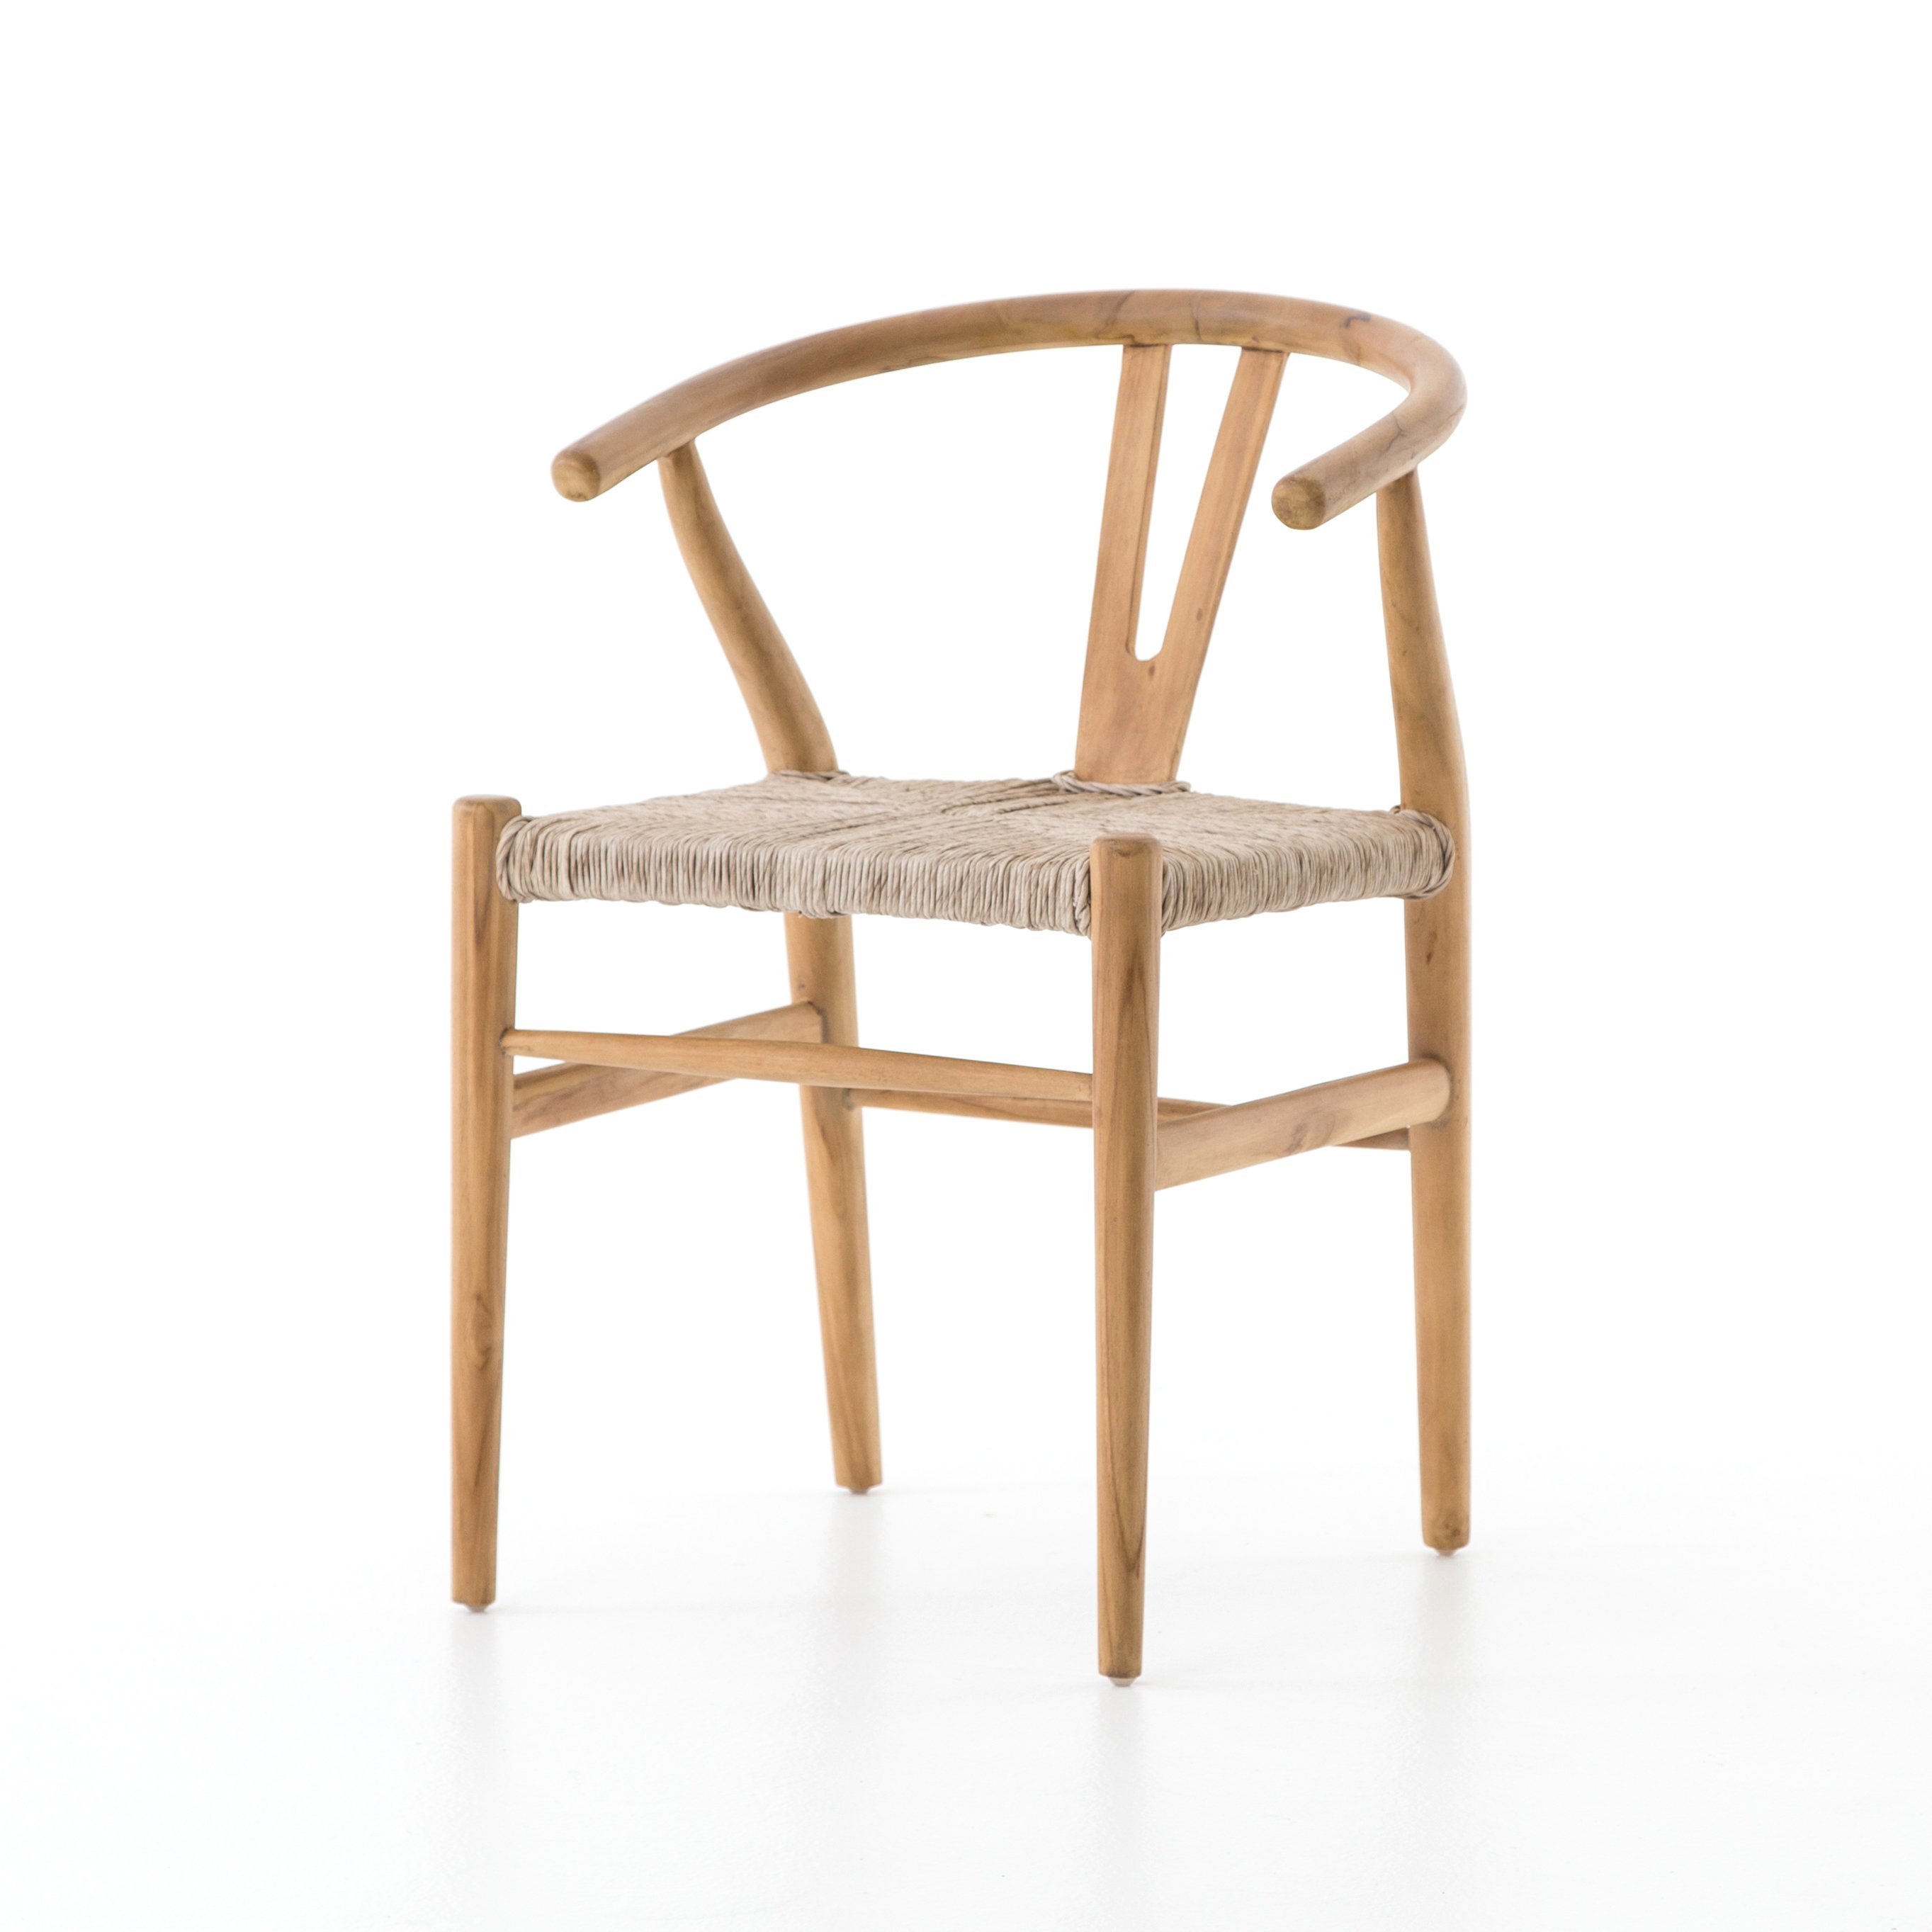 natural teak with matte finish dining chair  with curved back and woven seagrass seat $499.00